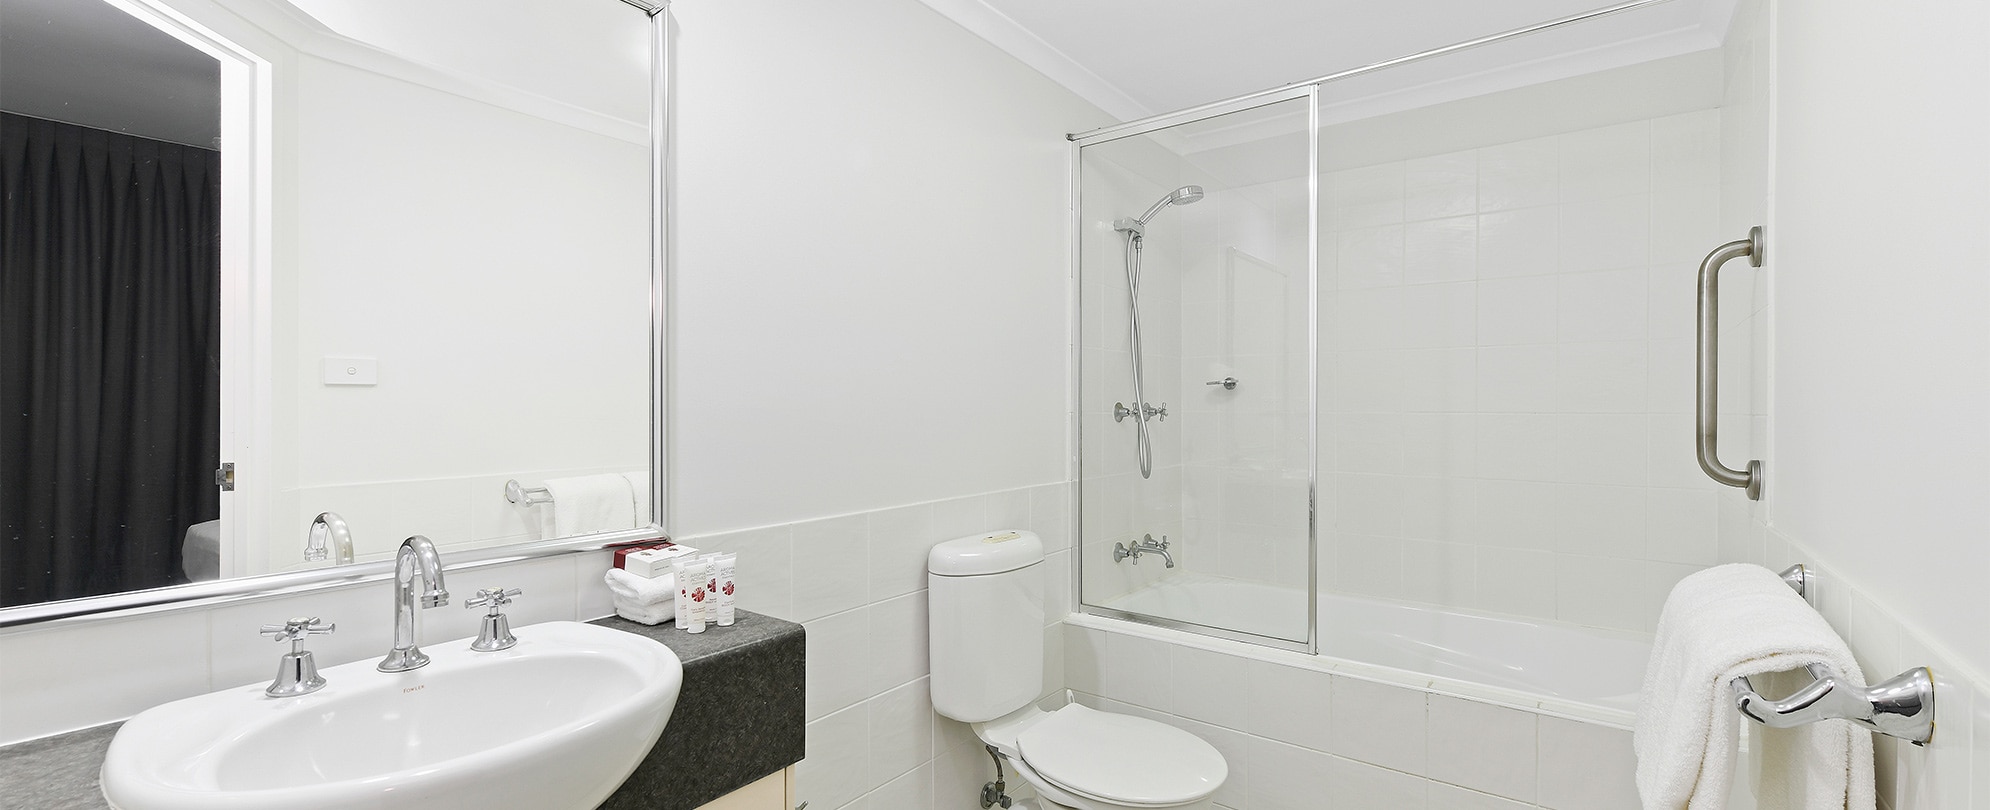 The bathroom of a standard suite at Club Wyndham Flynns Beach with a shower and tub combo, toilet, and vanity.